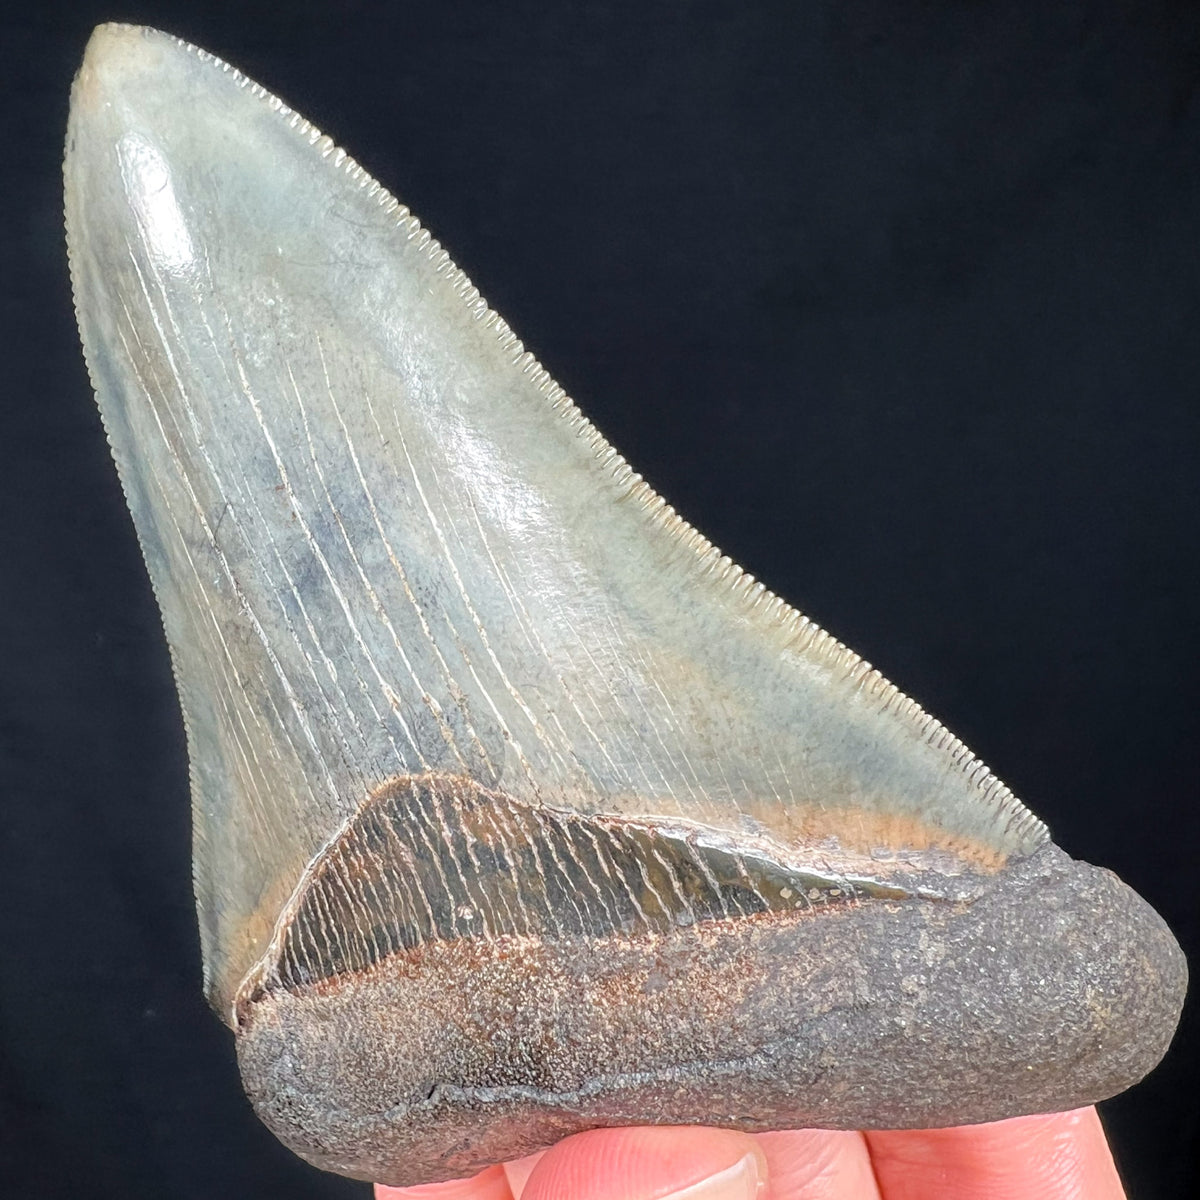 Serrated Edges of Megalodon Shark Tooth